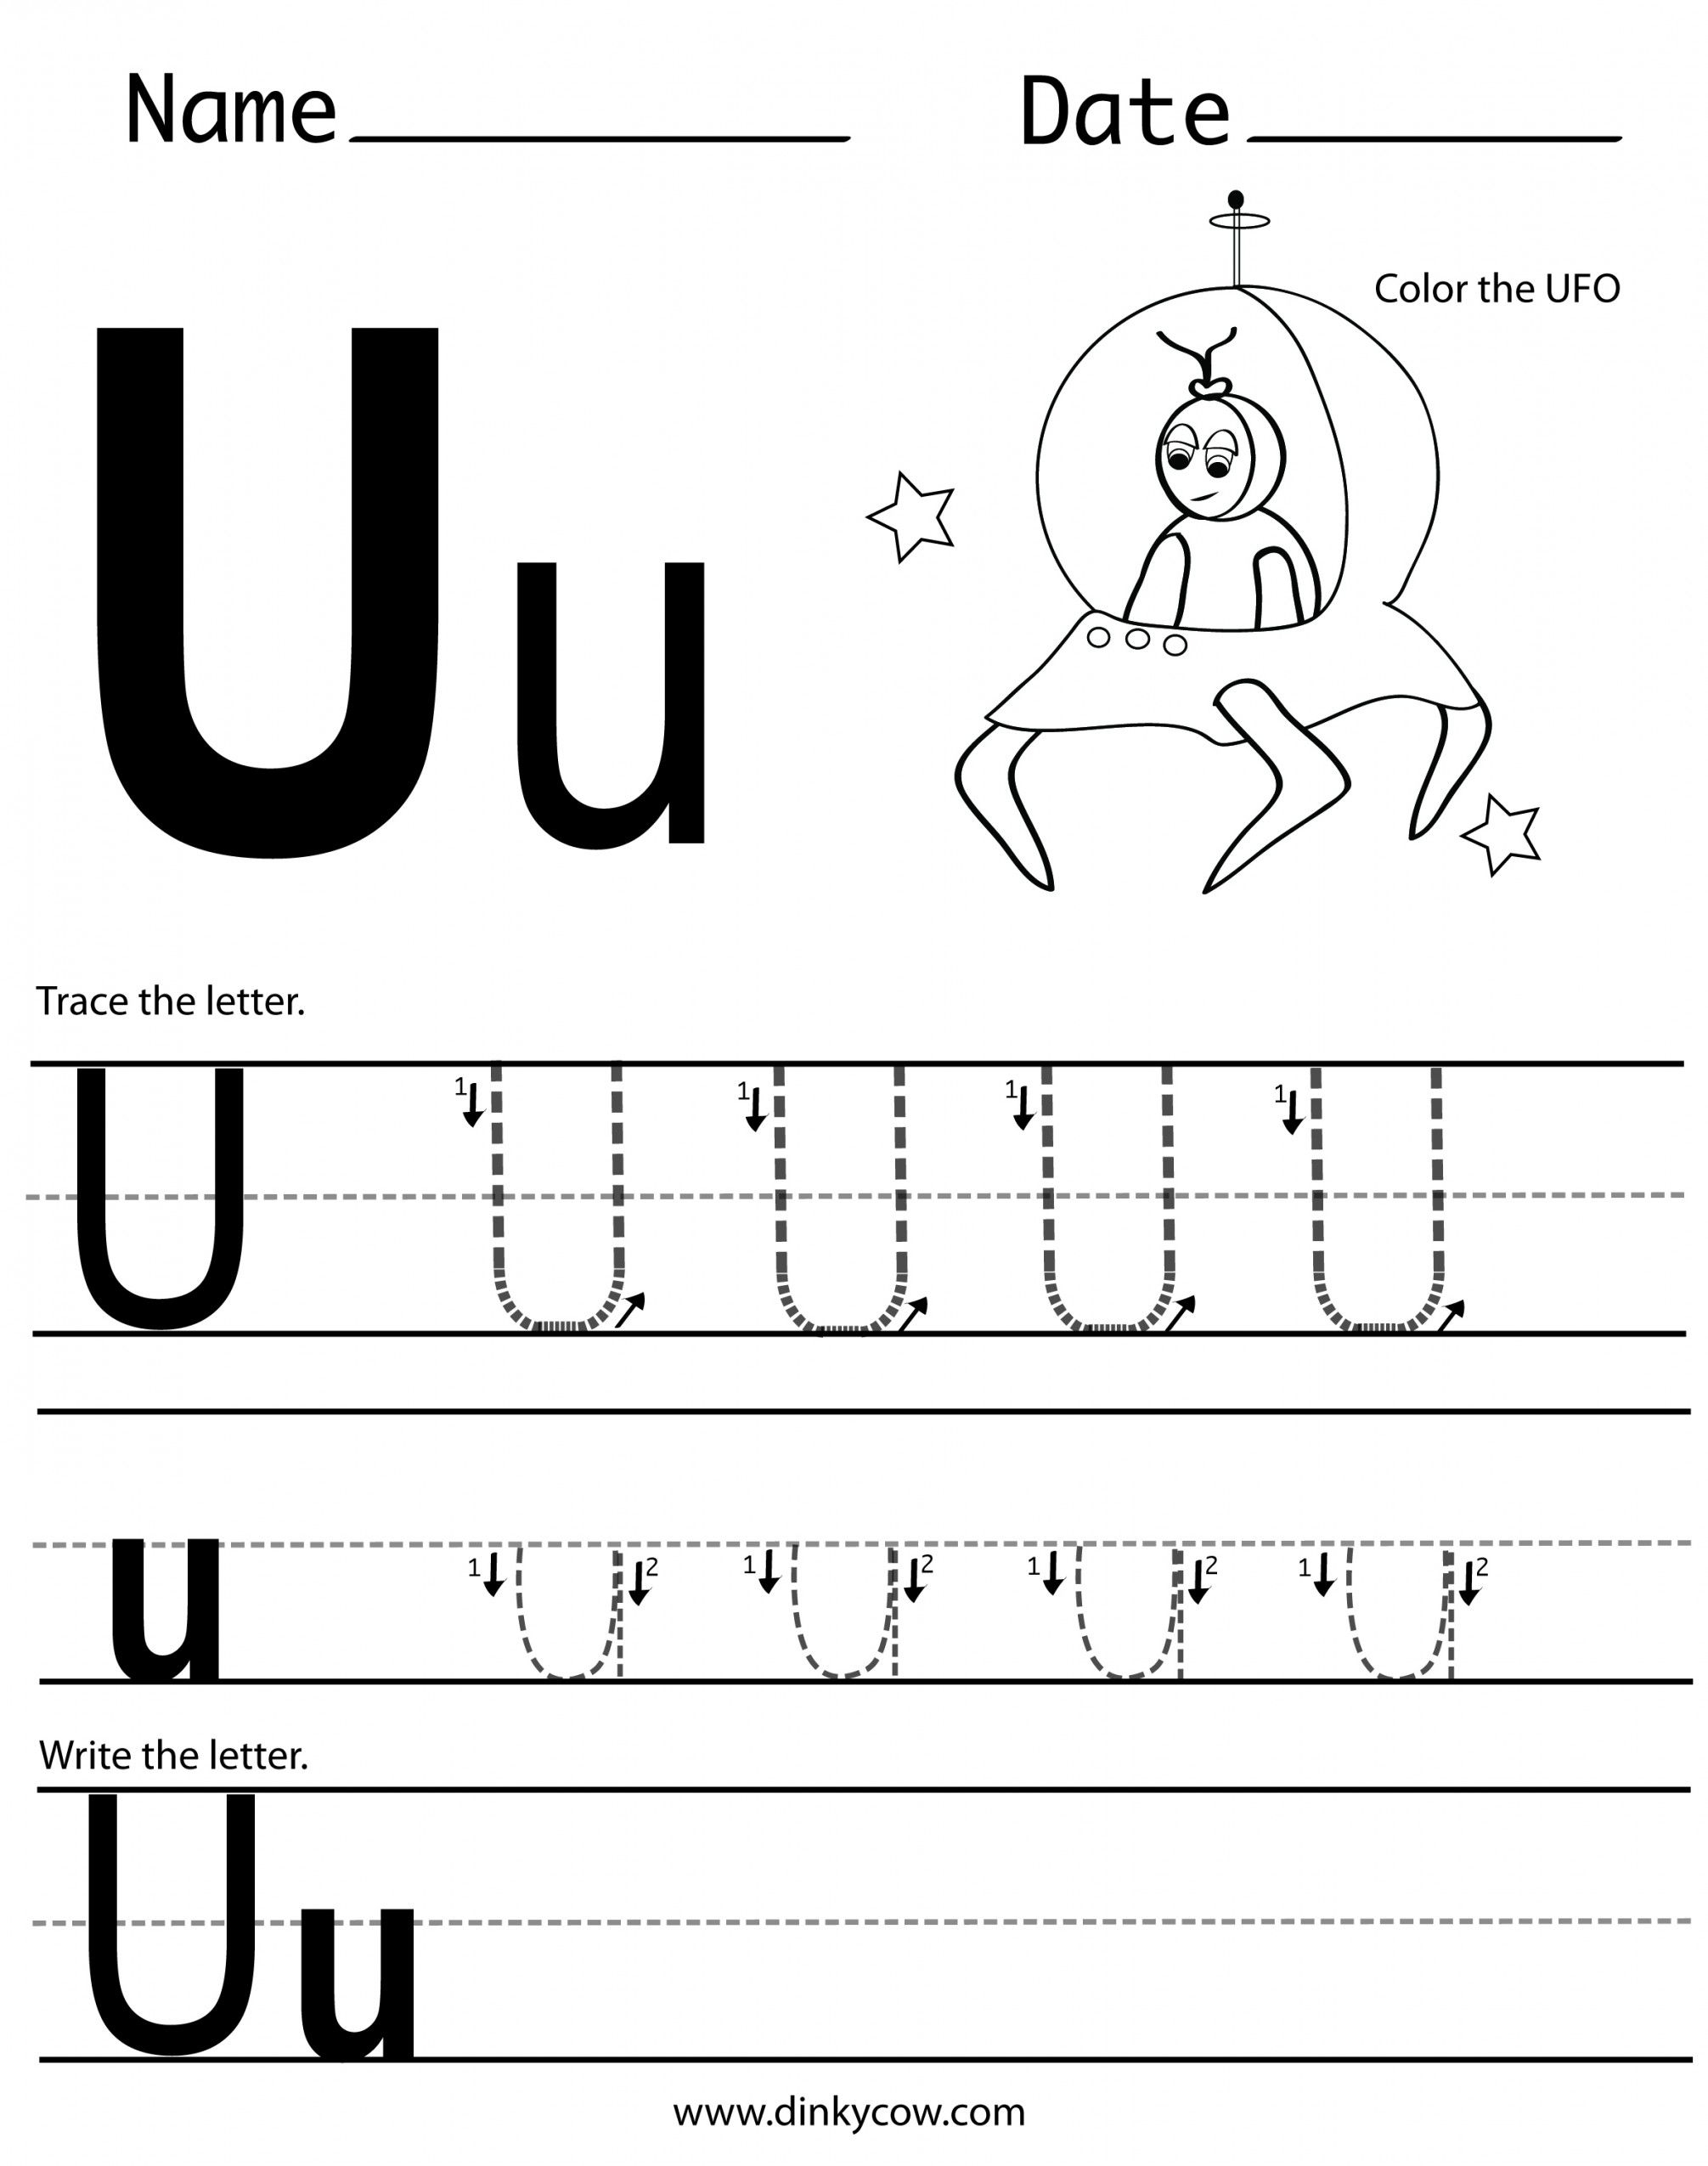 12 Letter U Worksheets For Young Learners | Kittybabylove within Letter U Worksheets For Pre-K